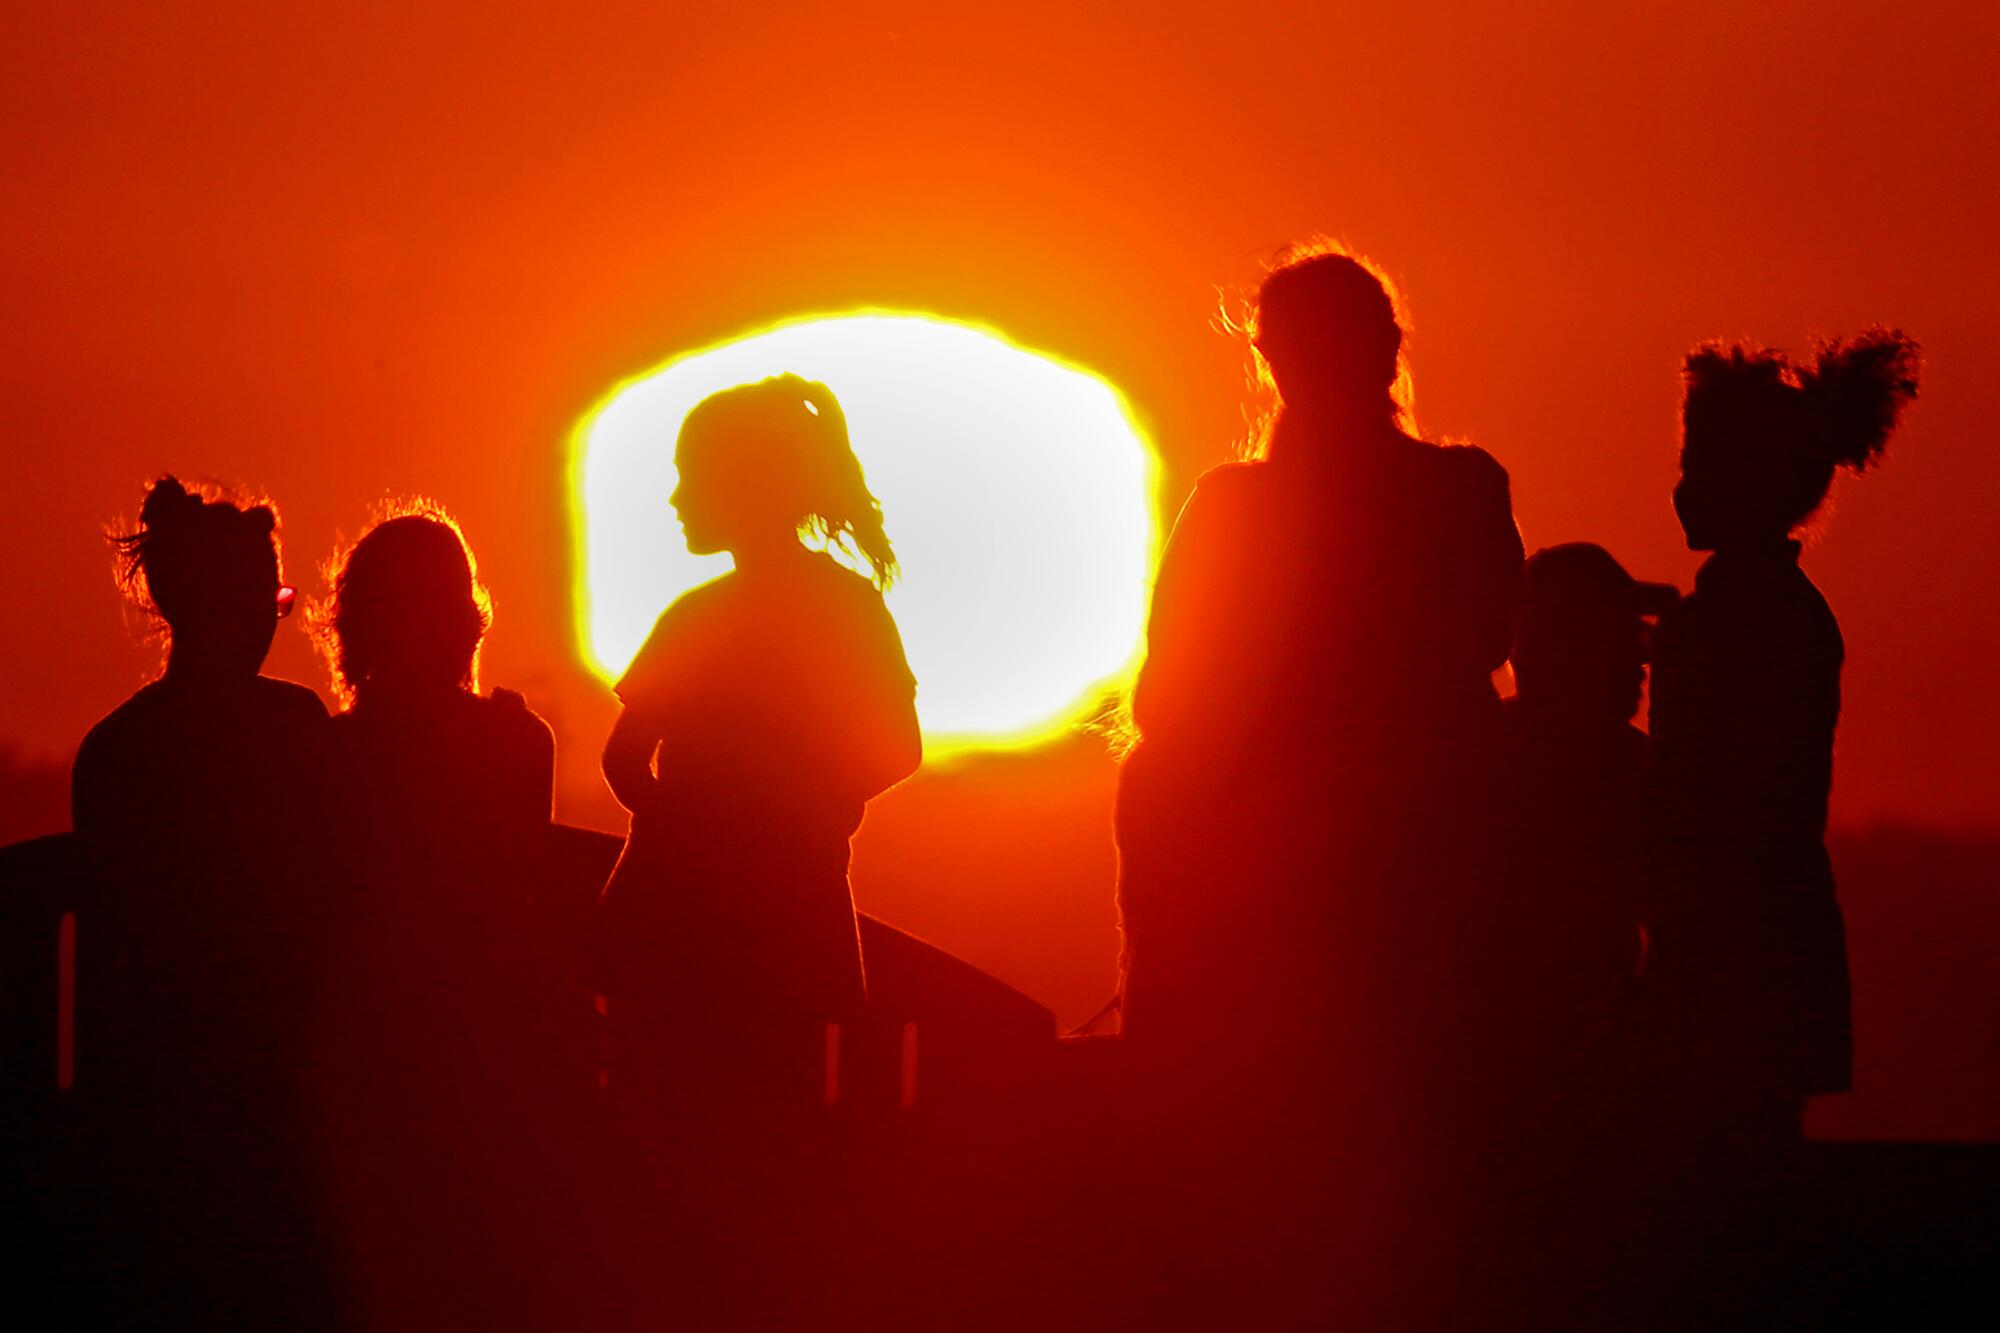 The blazing sun silhouettes visitors to Signal Hill.